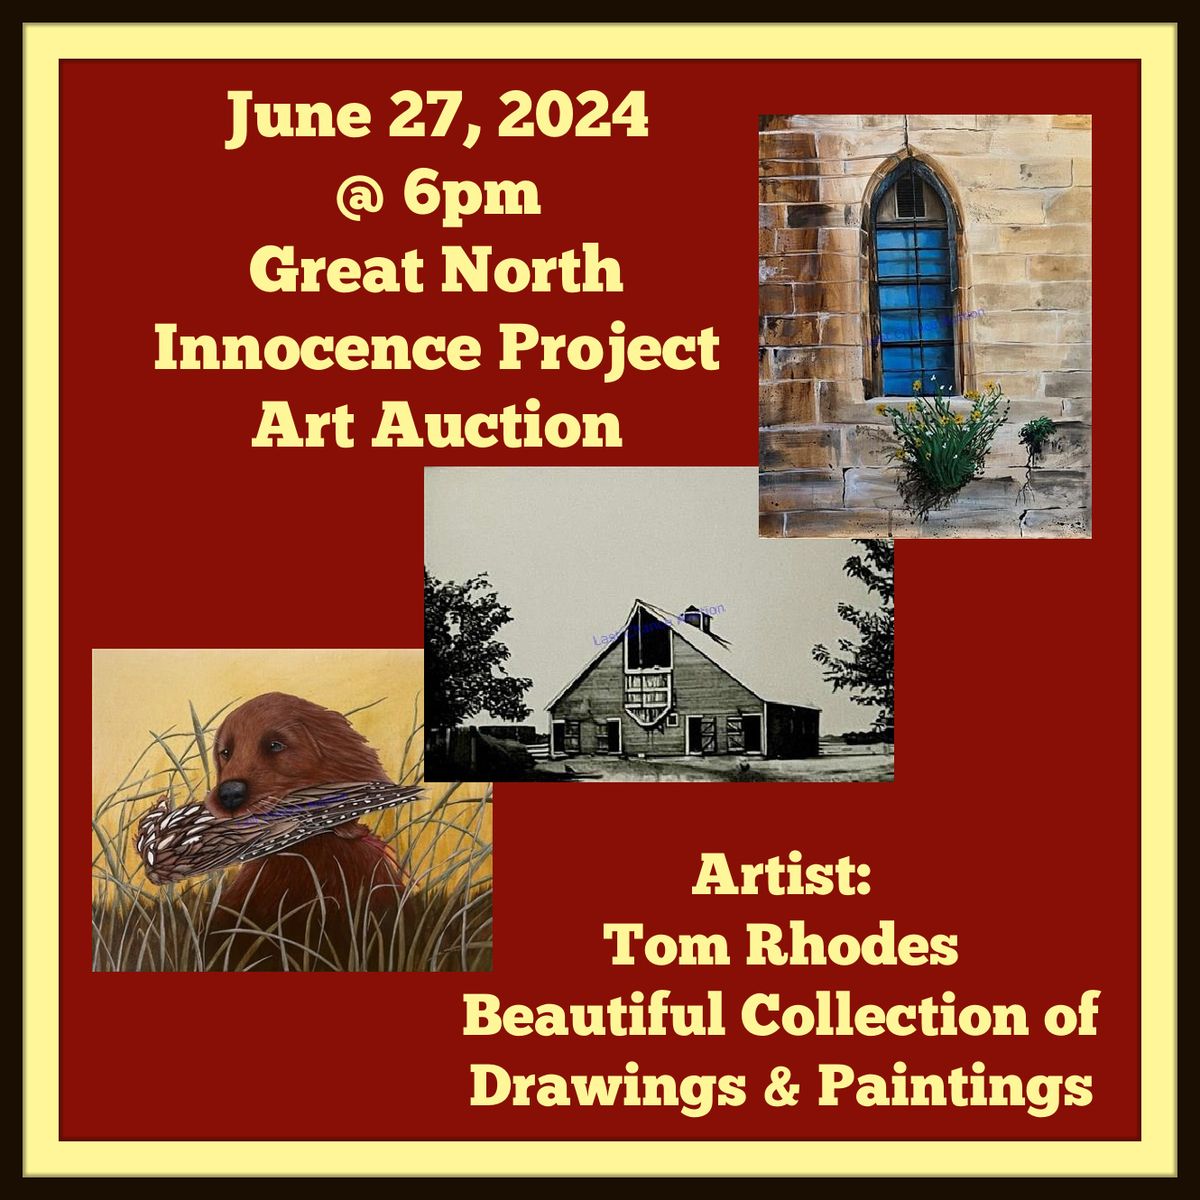 Great North Innocence Project Art Auction